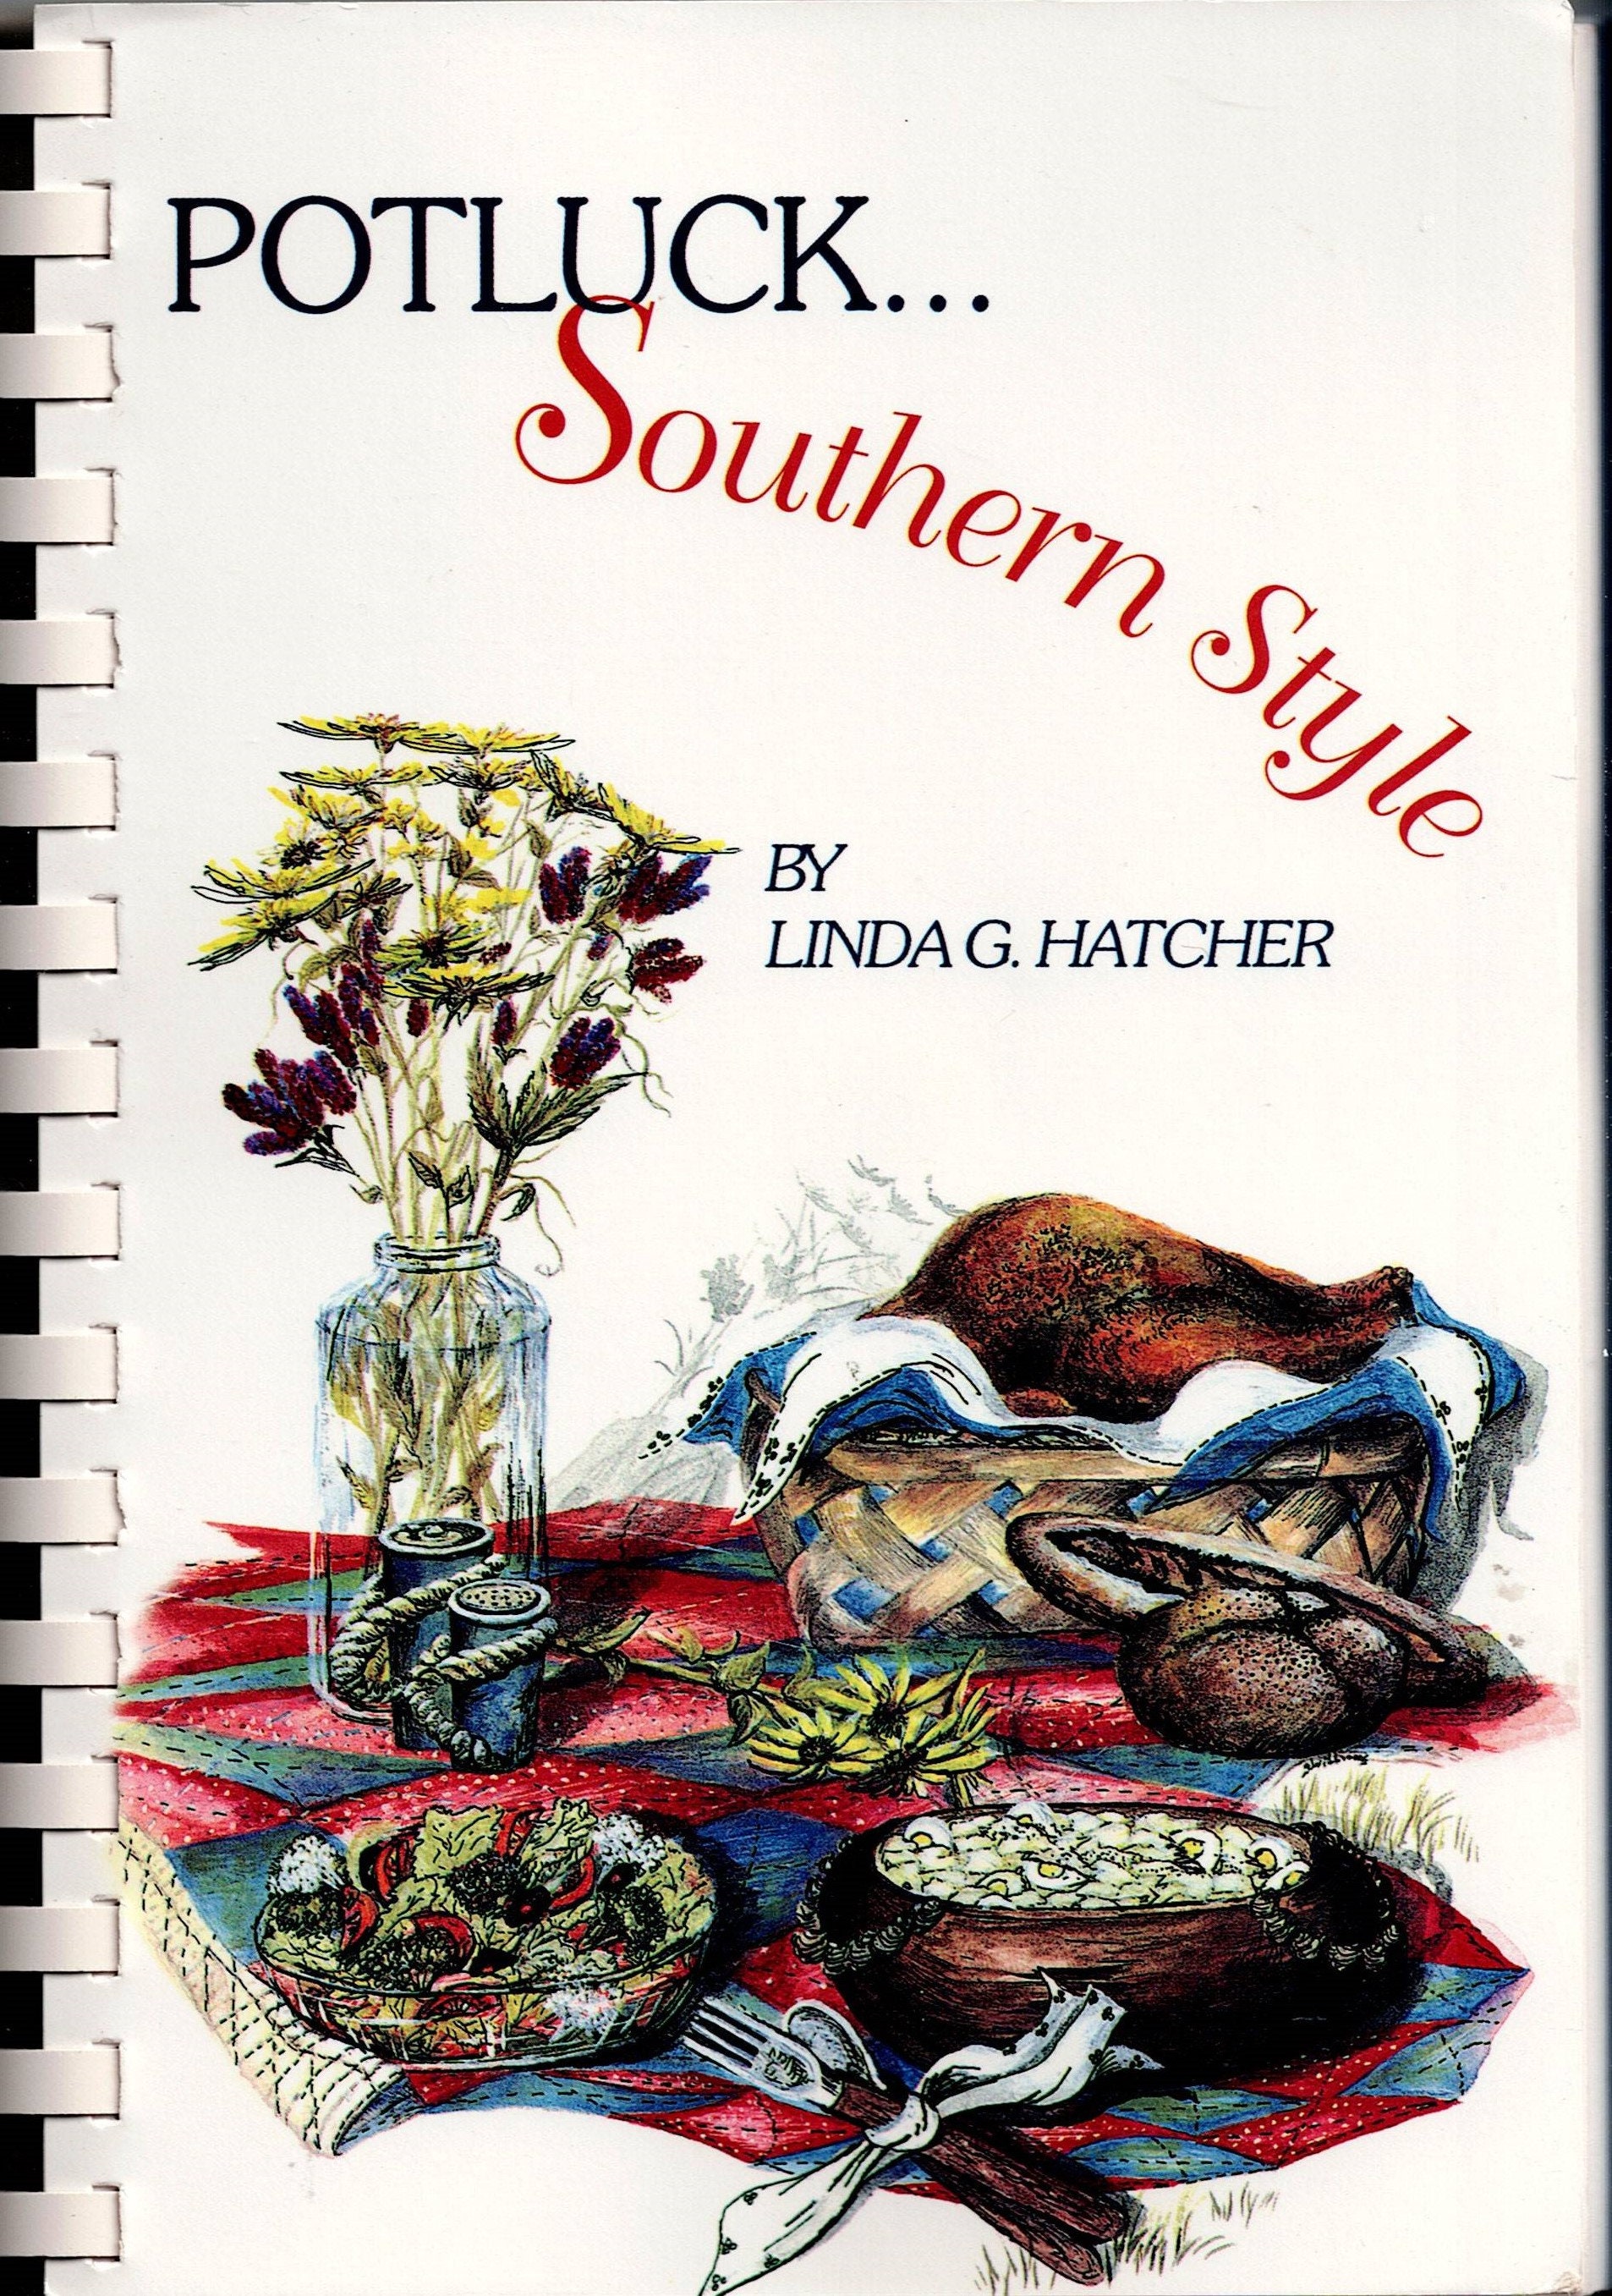 Southern Cookbook, Funny Cookbooks, Cooking Ebook, How to Cook Southern  Style Set, Instant Download 